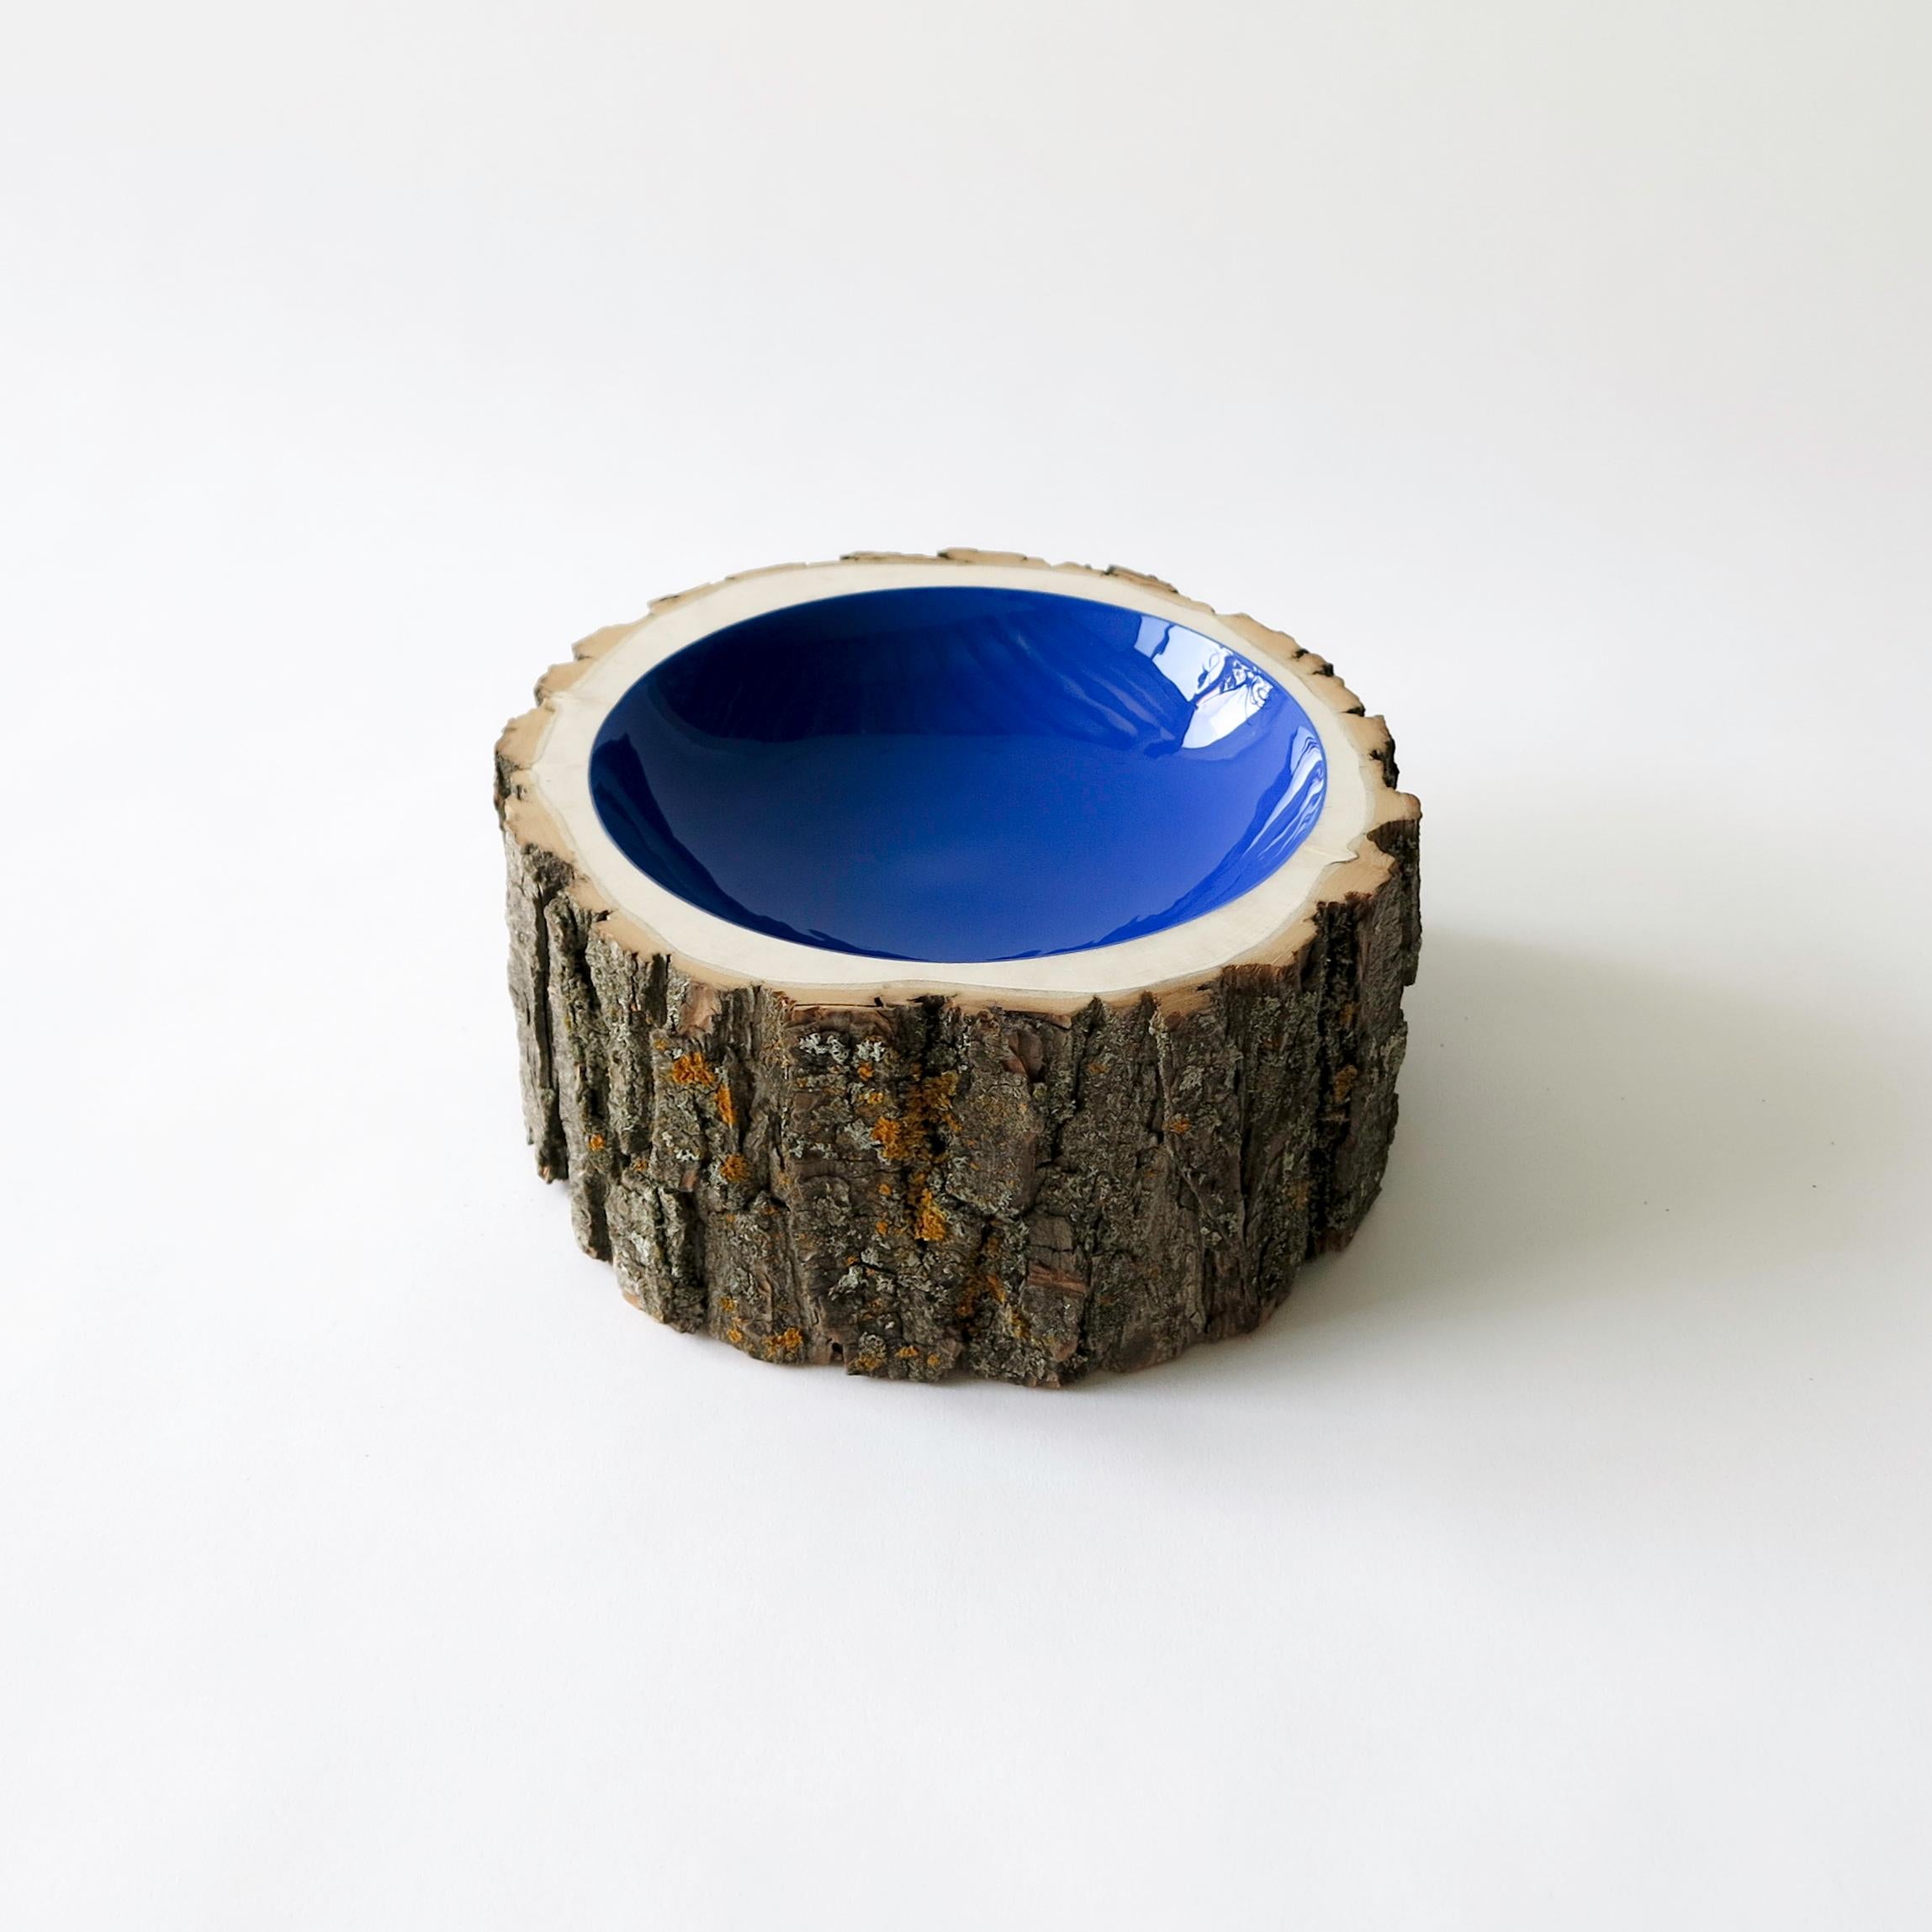 Perfect as a feature objet d'art on your table or shelves, a catch-all for jewellery and special items, or displayed as a group for a striking centrepiece. 
Each Log Bowl is unique and makes the perfect one of a kind gift.

Log bowls combine the